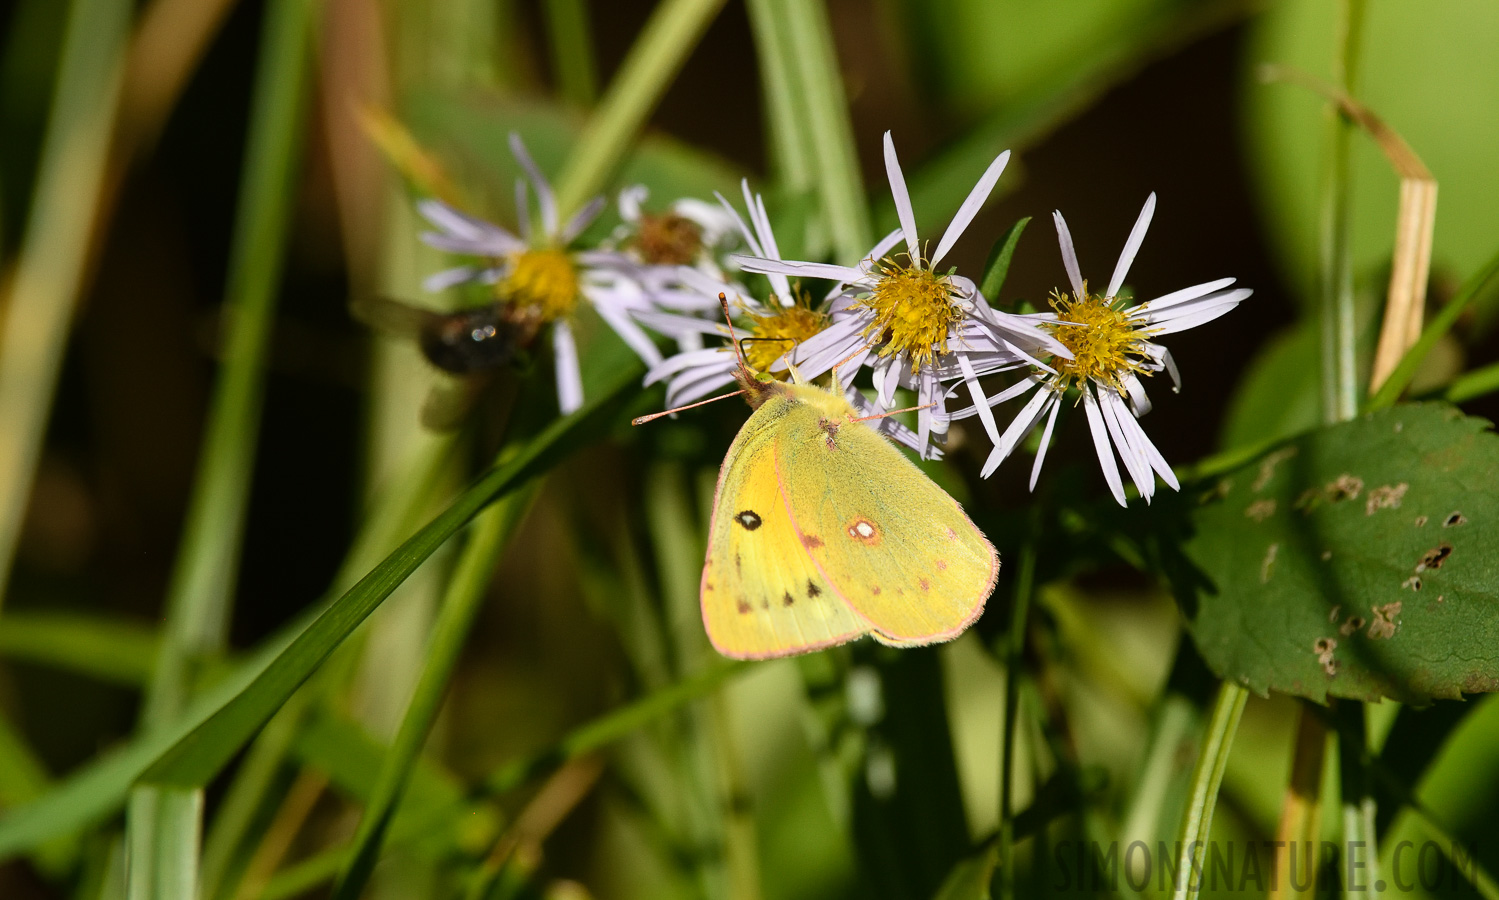 Colias eurytheme [400 mm, 1/2500 sec at f / 8.0, ISO 1000]